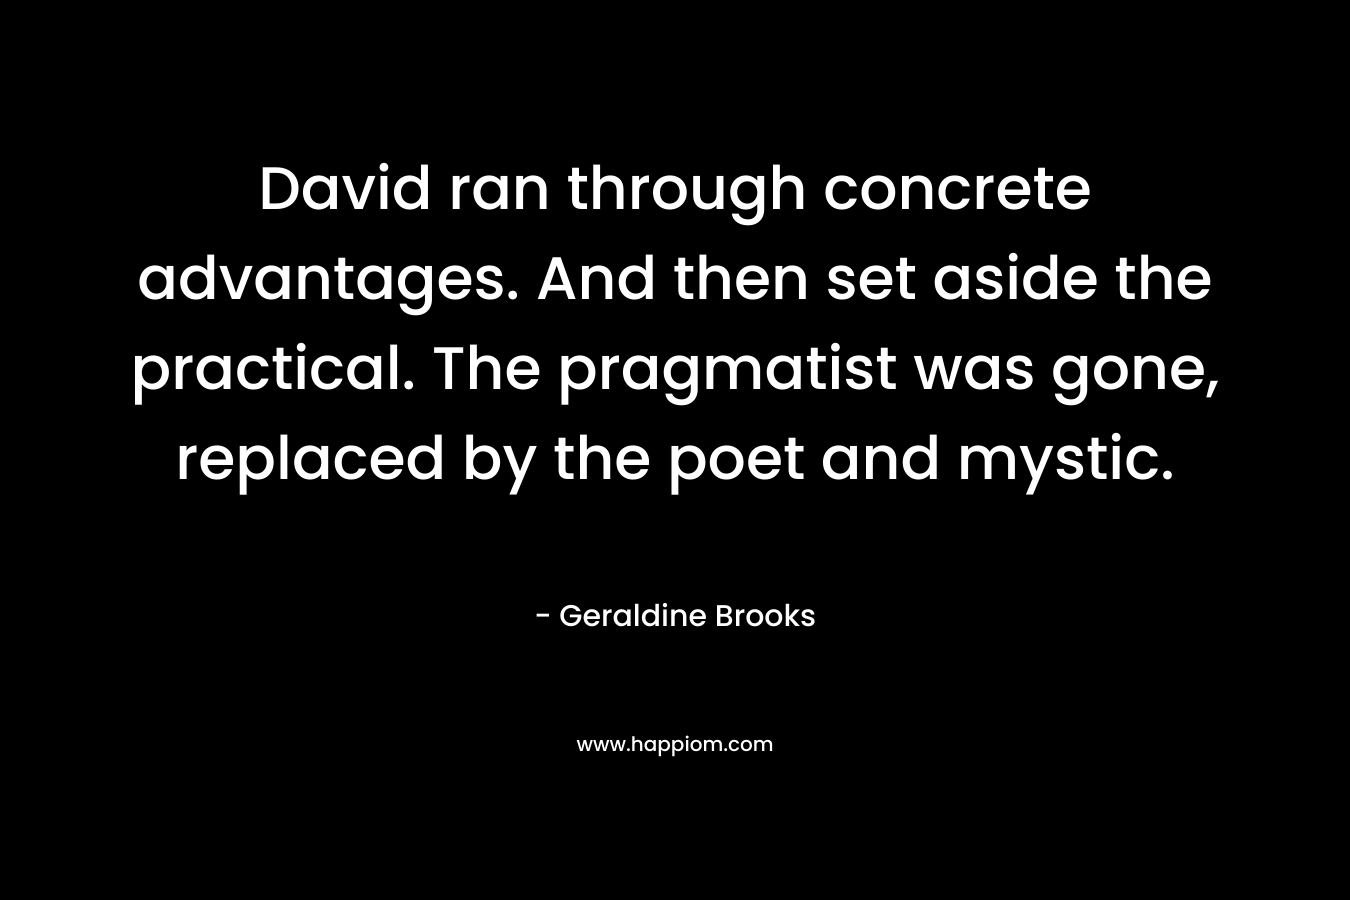 David ran through concrete advantages. And then set aside the practical. The pragmatist was gone, replaced by the poet and mystic.